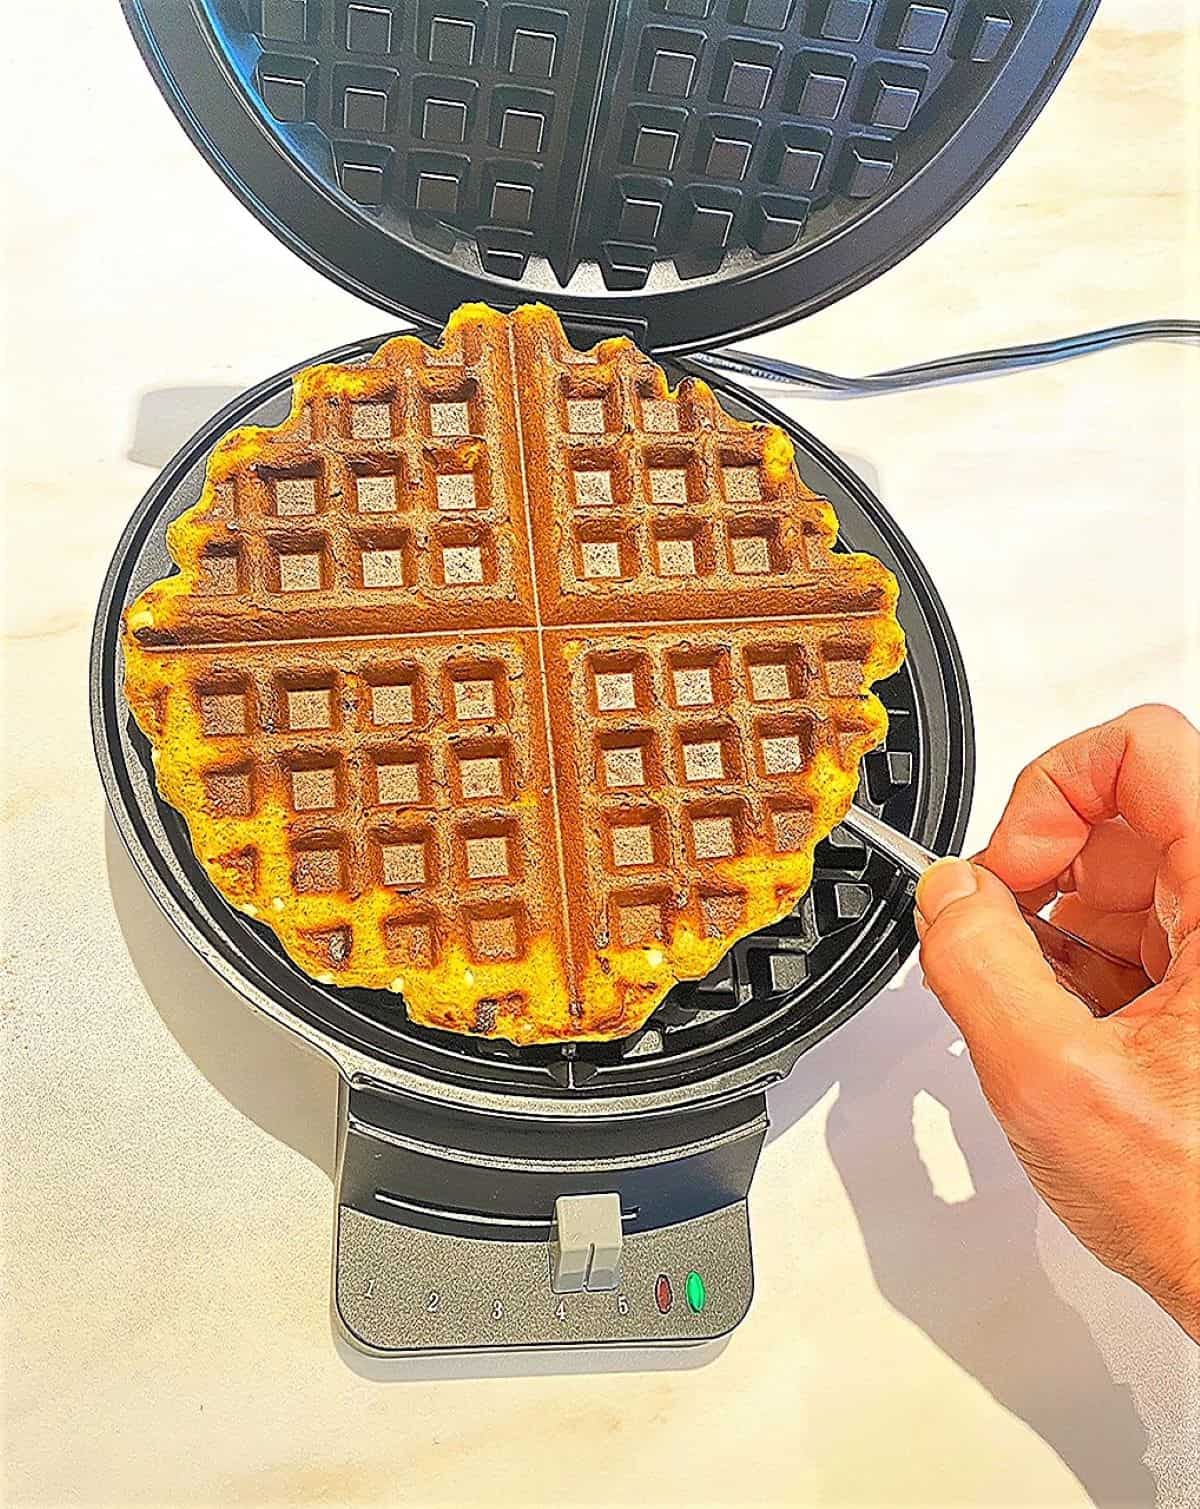 Golden yellow-brown cooked waffle with four sections and grid marks being taken out of a round wafflemaker with black grids